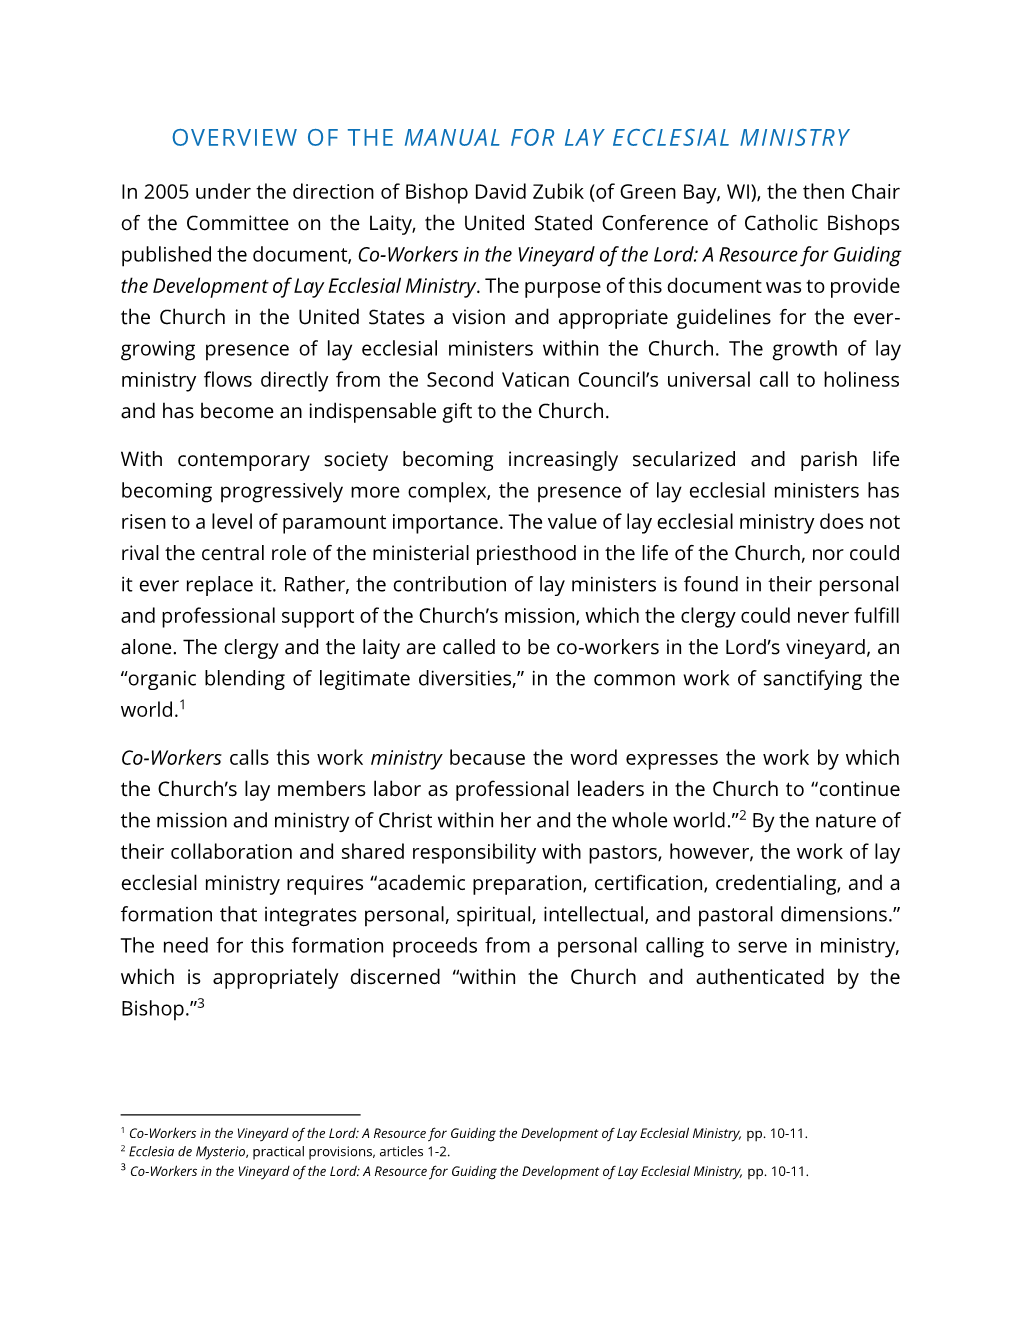 Overview of the Manual for Lay Ecclesial Ministry